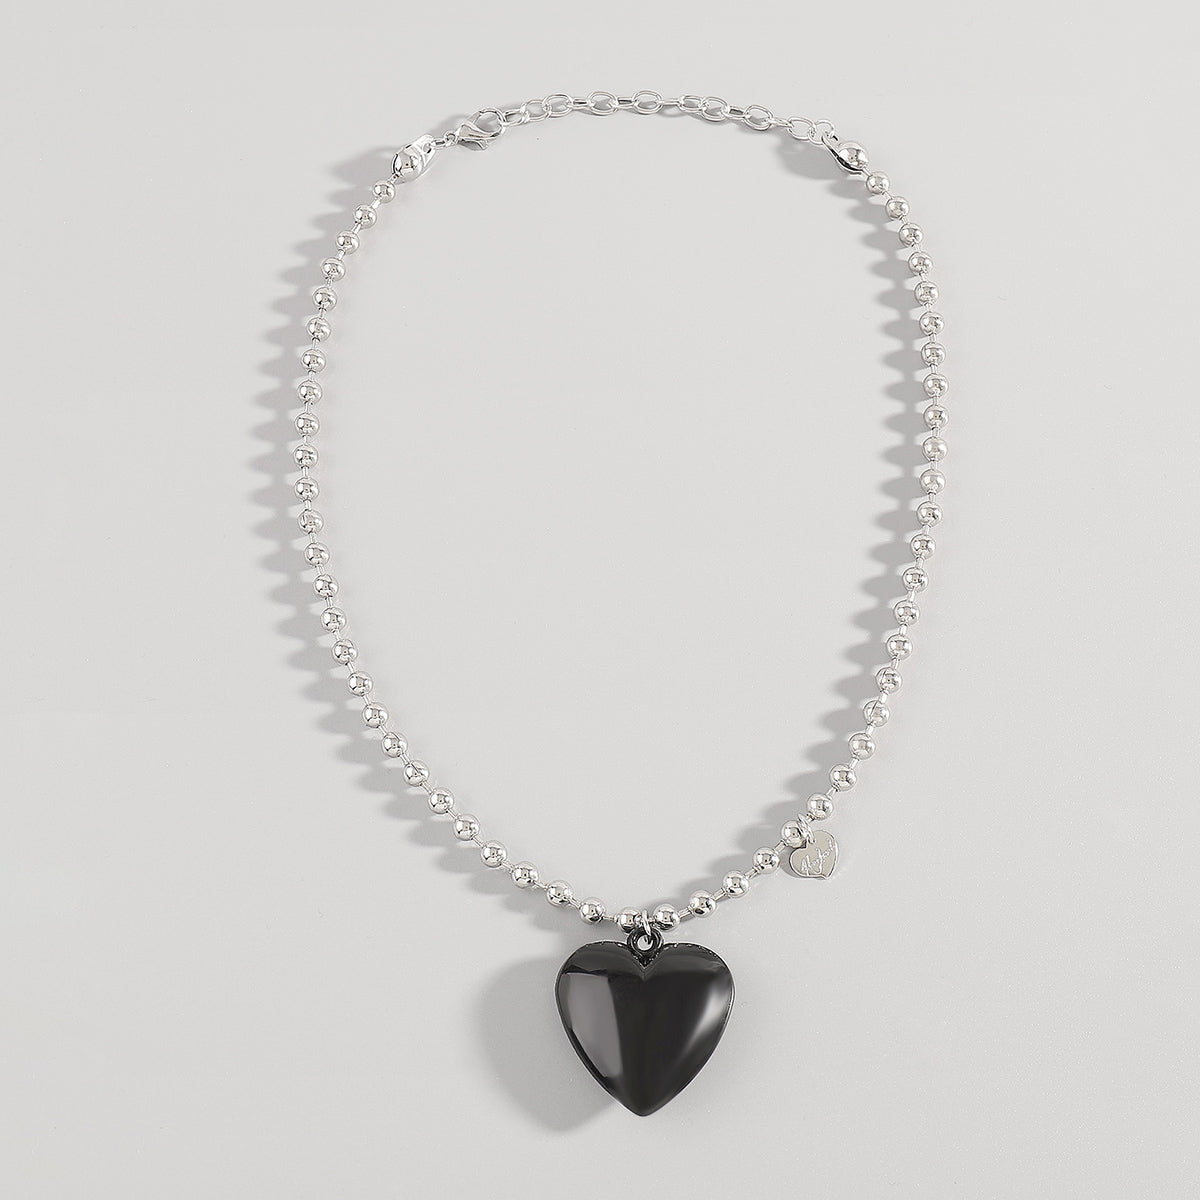 N11416 Metal Bead Chain Heart Pendant Necklace